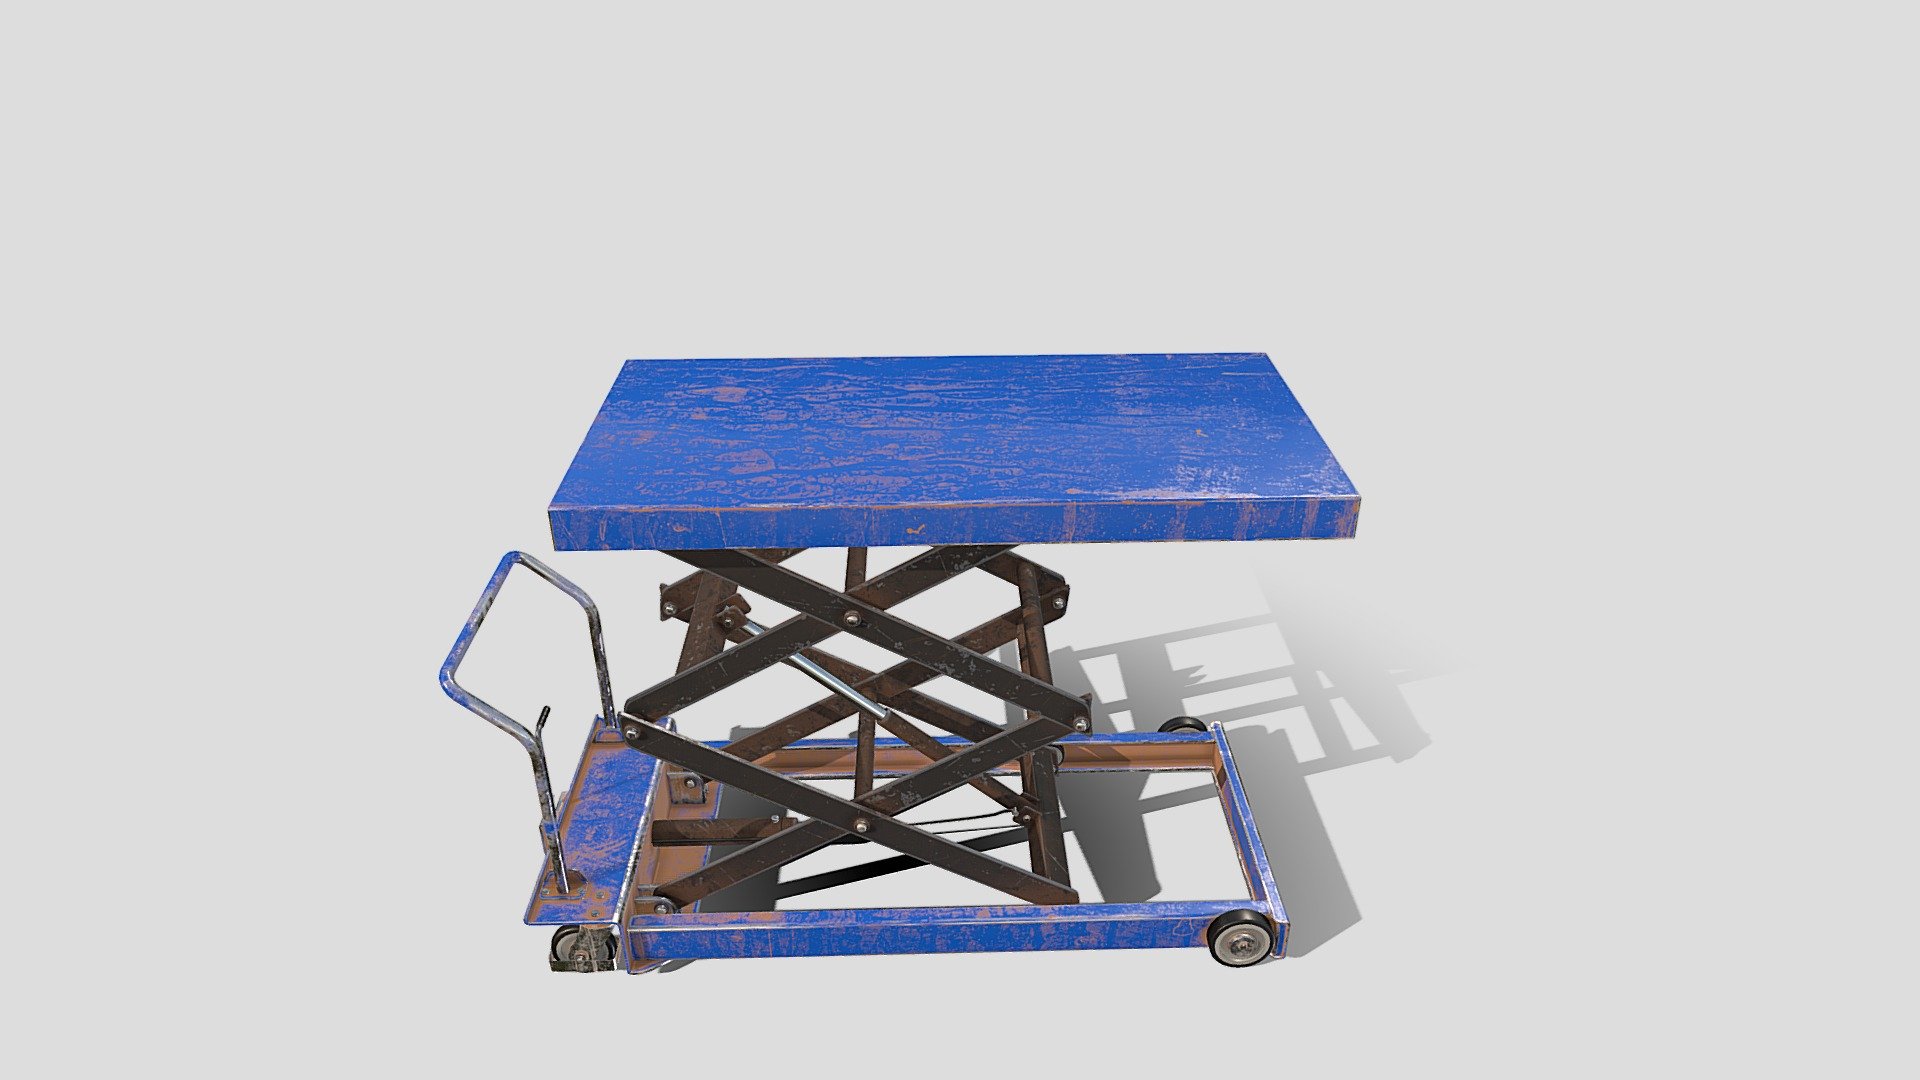 Animated scissor lift 3d model rendered with Cycles in Blender, as per seen on attached images. 
The animation consists of the lift elevating over 72 frames(it can easily be scaled to as many frames needed). It is made using an armature and 9 bones.
The model is scaled to real-life scale.

File formats:
-.blend, rendered with cycles, as seen in the images;
-.blend, animated, rendered with cycles, as seen in the images;
-.fbx, animated, with materials applied;
-.fbx, with materials applied;
-.obj, with materials applied;
-.dae, with materials applied;
-.stl;

Files come named appropriately and split by file format.

3D Software:
The 3D model was originally created in Blender 3.1 and rendered with Cycles.

Materials and textures:
The models have materials applied in all formats, and are ready to import and render.
Materials are image based using PBR, the model comes with five 4k png image textures.

For any problems please feel free to contact me.

Don't forget to rate and enjoy! - Animated Scissor Lift Table Blue - Buy Royalty Free 3D model by dragosburian 3d model